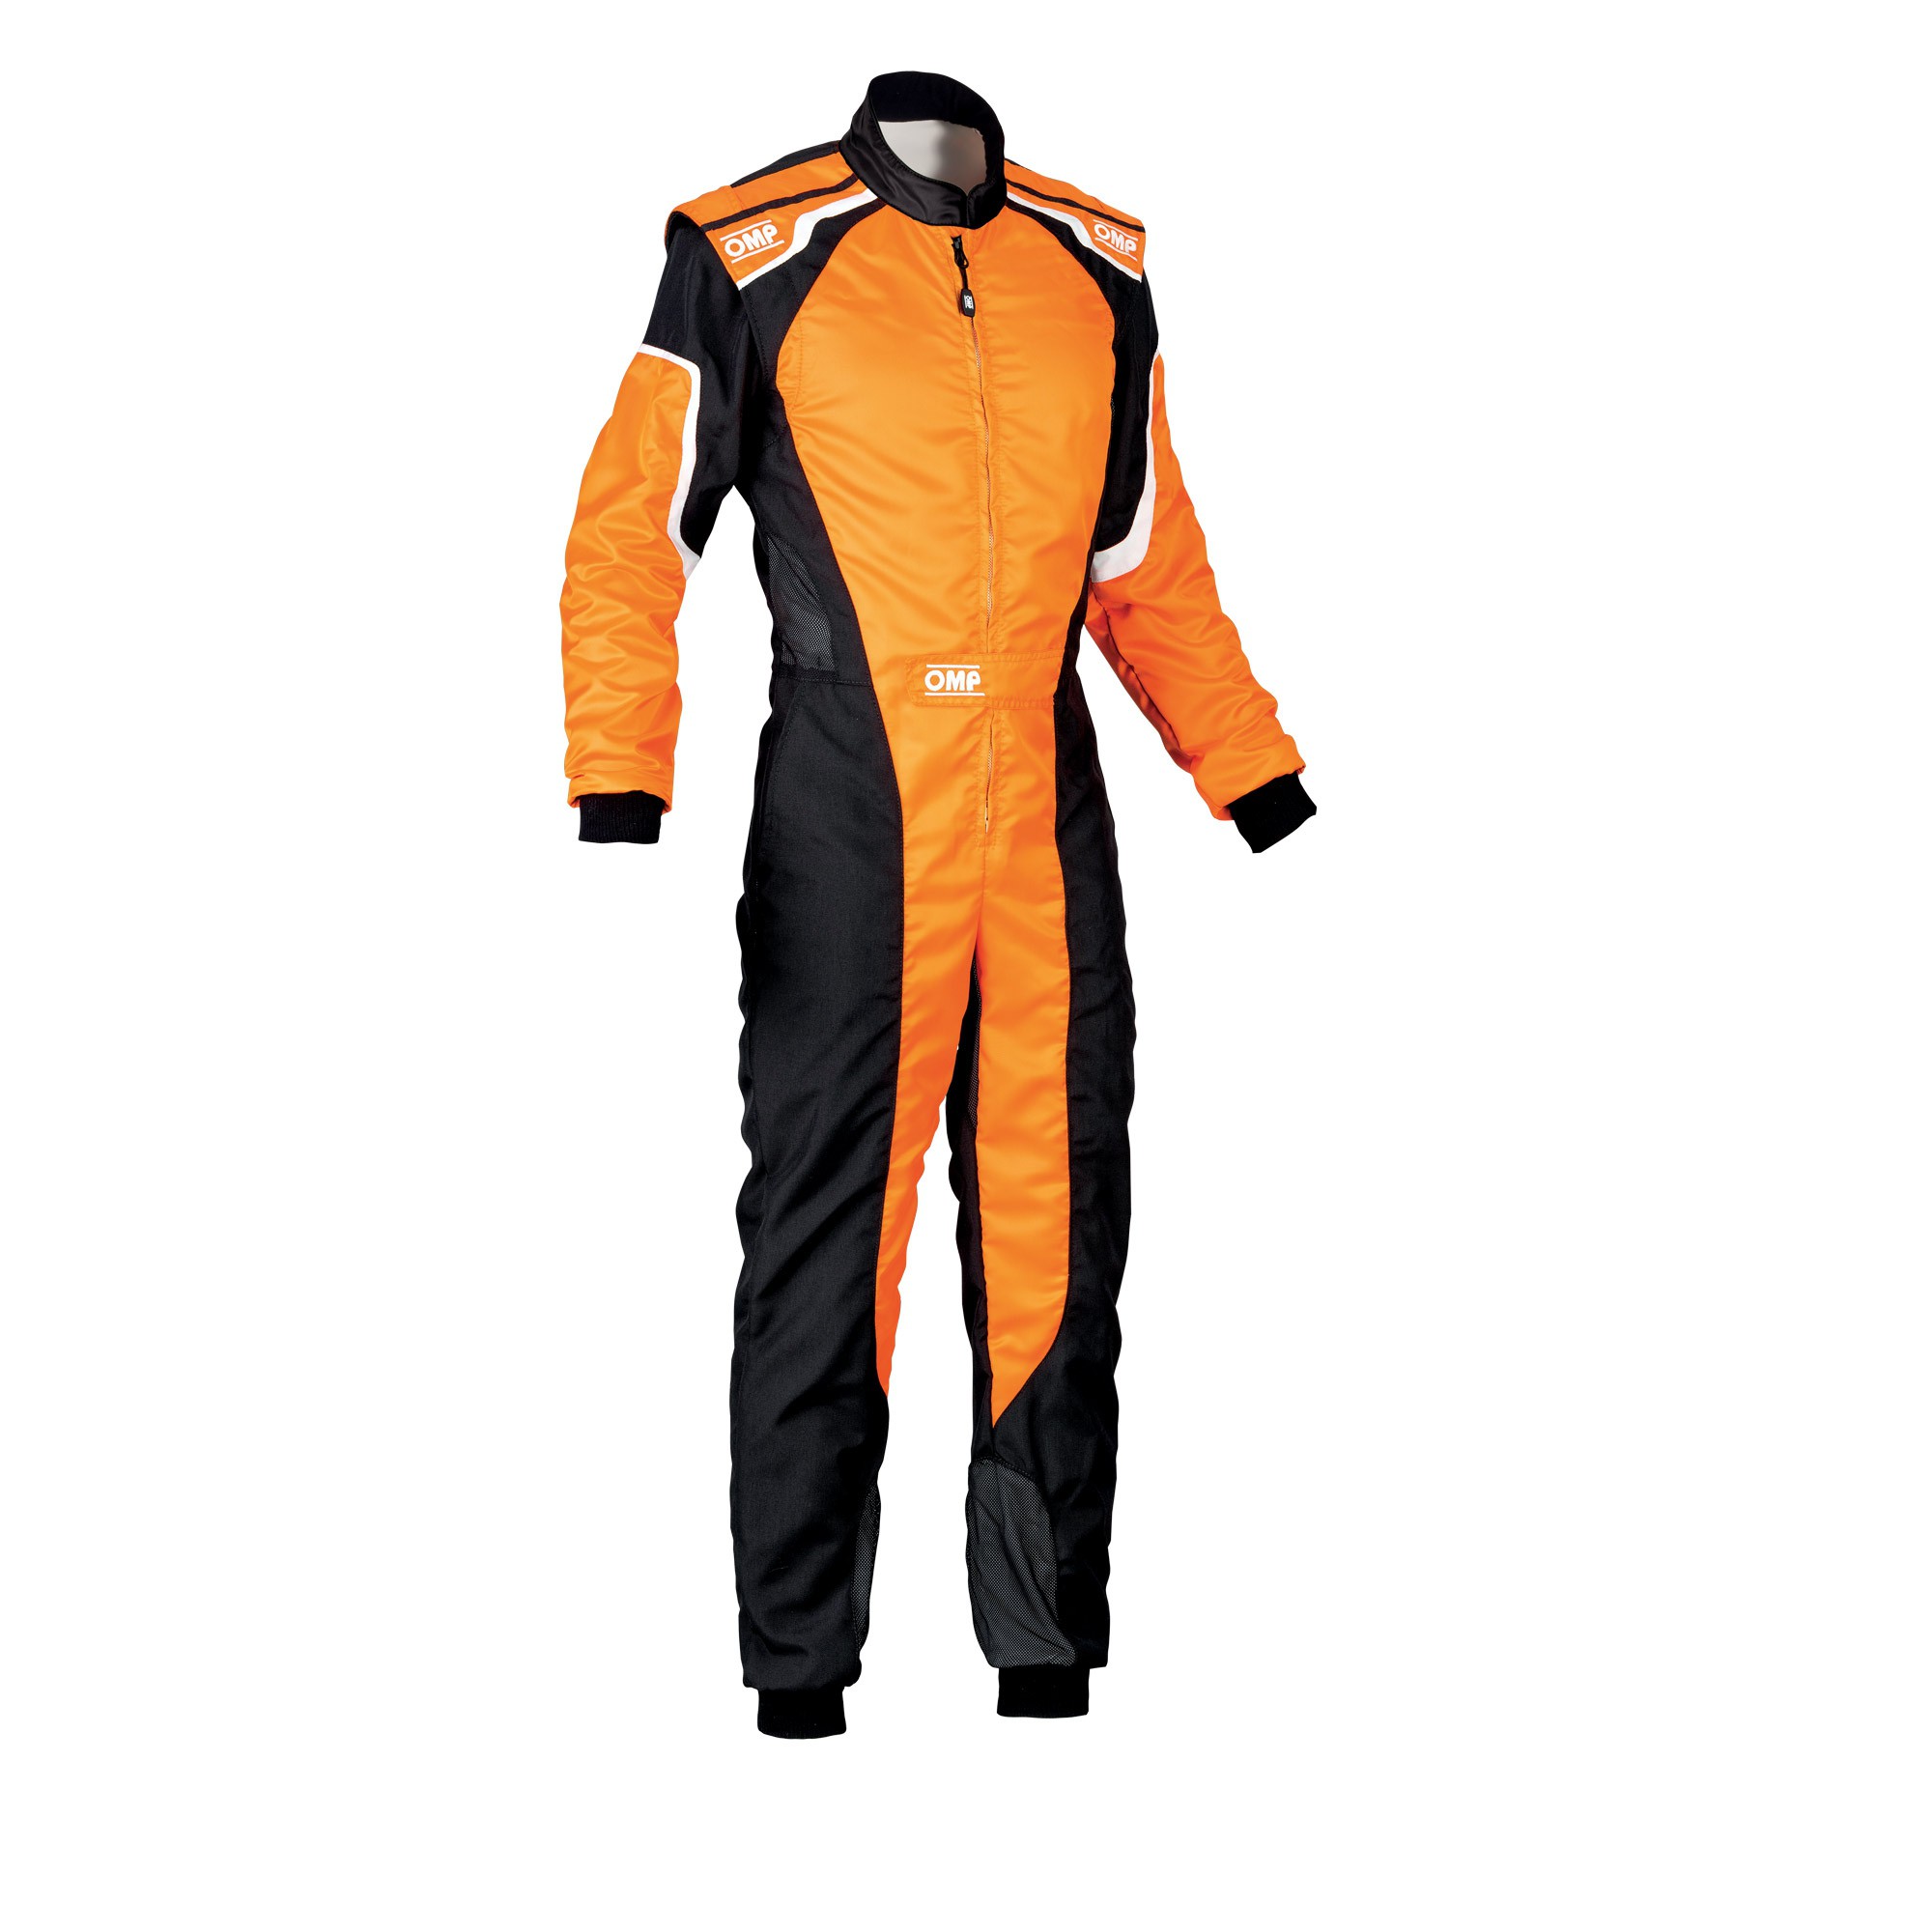 OMP Go Kart Race Suit CIK FIA Level 2 with free gifts Gloves and balaclava 